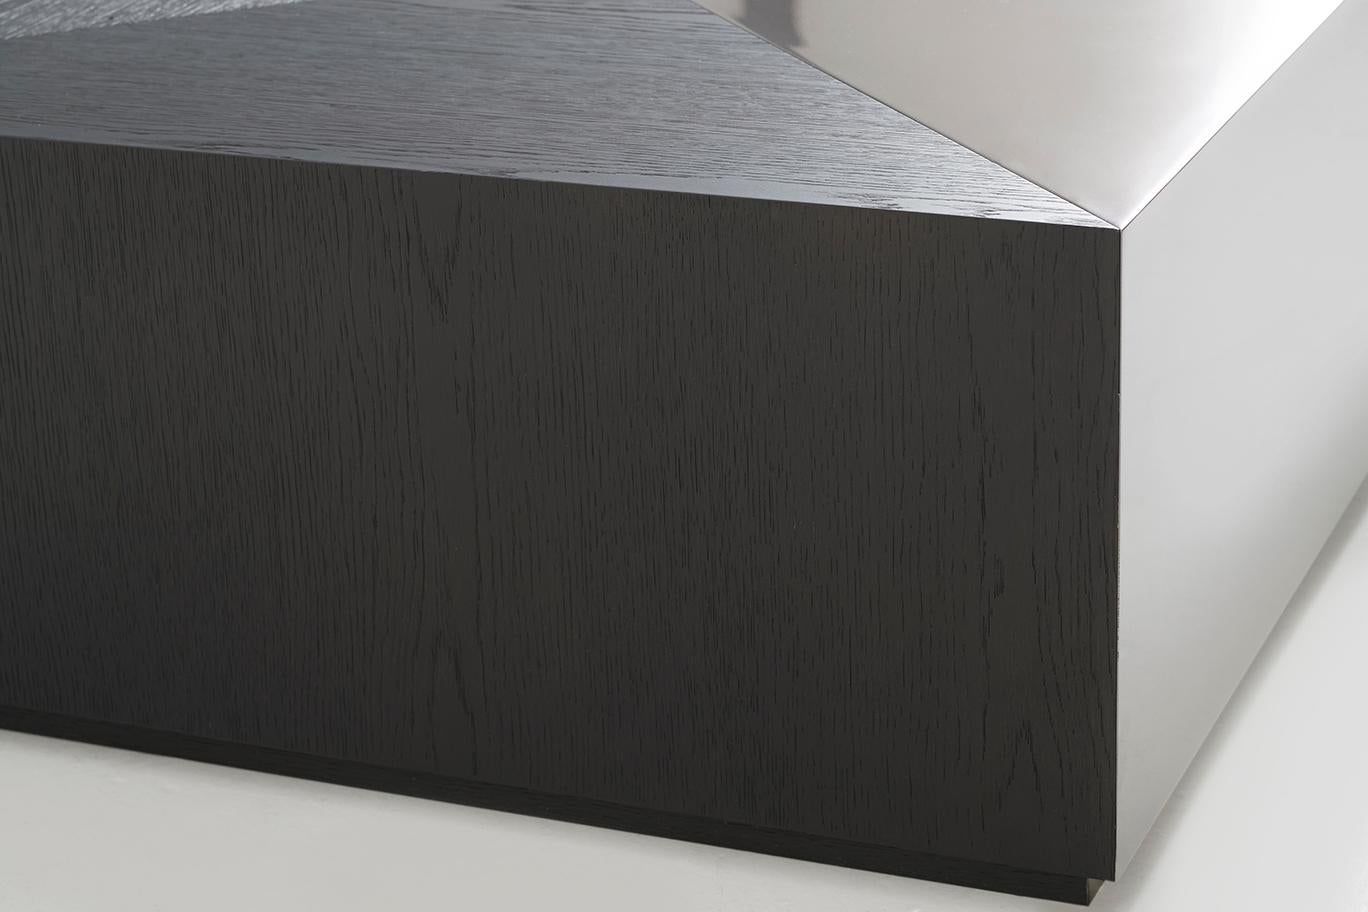 Garnet: The Garnet has a wooden base. It combines gun metal lacquer with brushed oak. 

Dark brushed oak or a gun metal look? The choice is yours. As the Garnet is available in various dimensions and looks, it is suitable for use as a coffee table